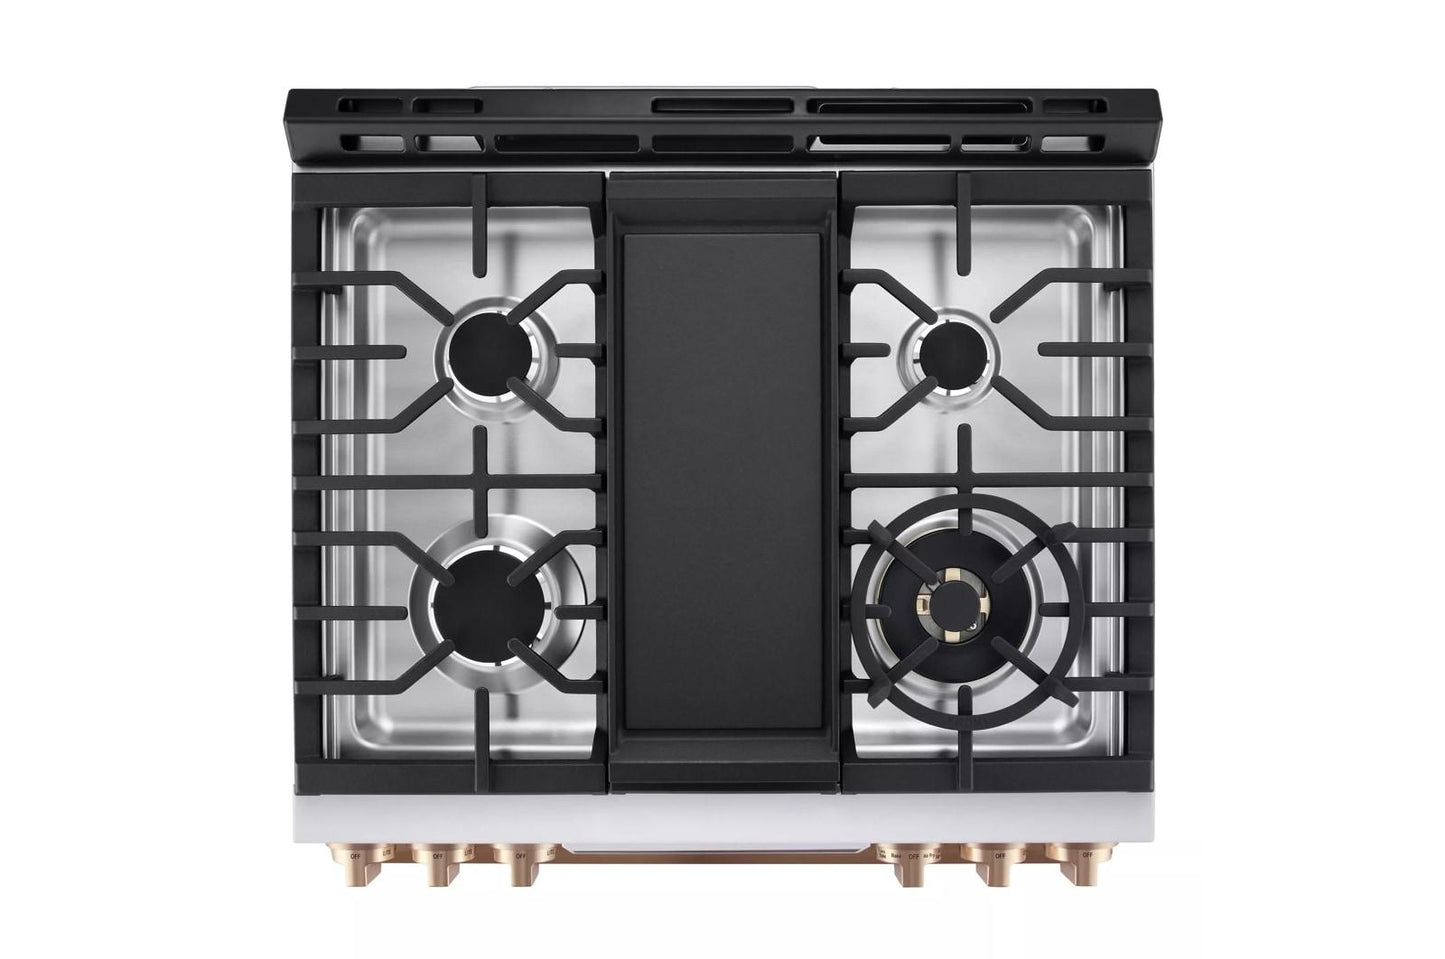 Lg LSGS6338N Lg Studio 6.3 Cu. Ft. Instaview® Gas Slide-In Range With Probake Convection® And Air Fry